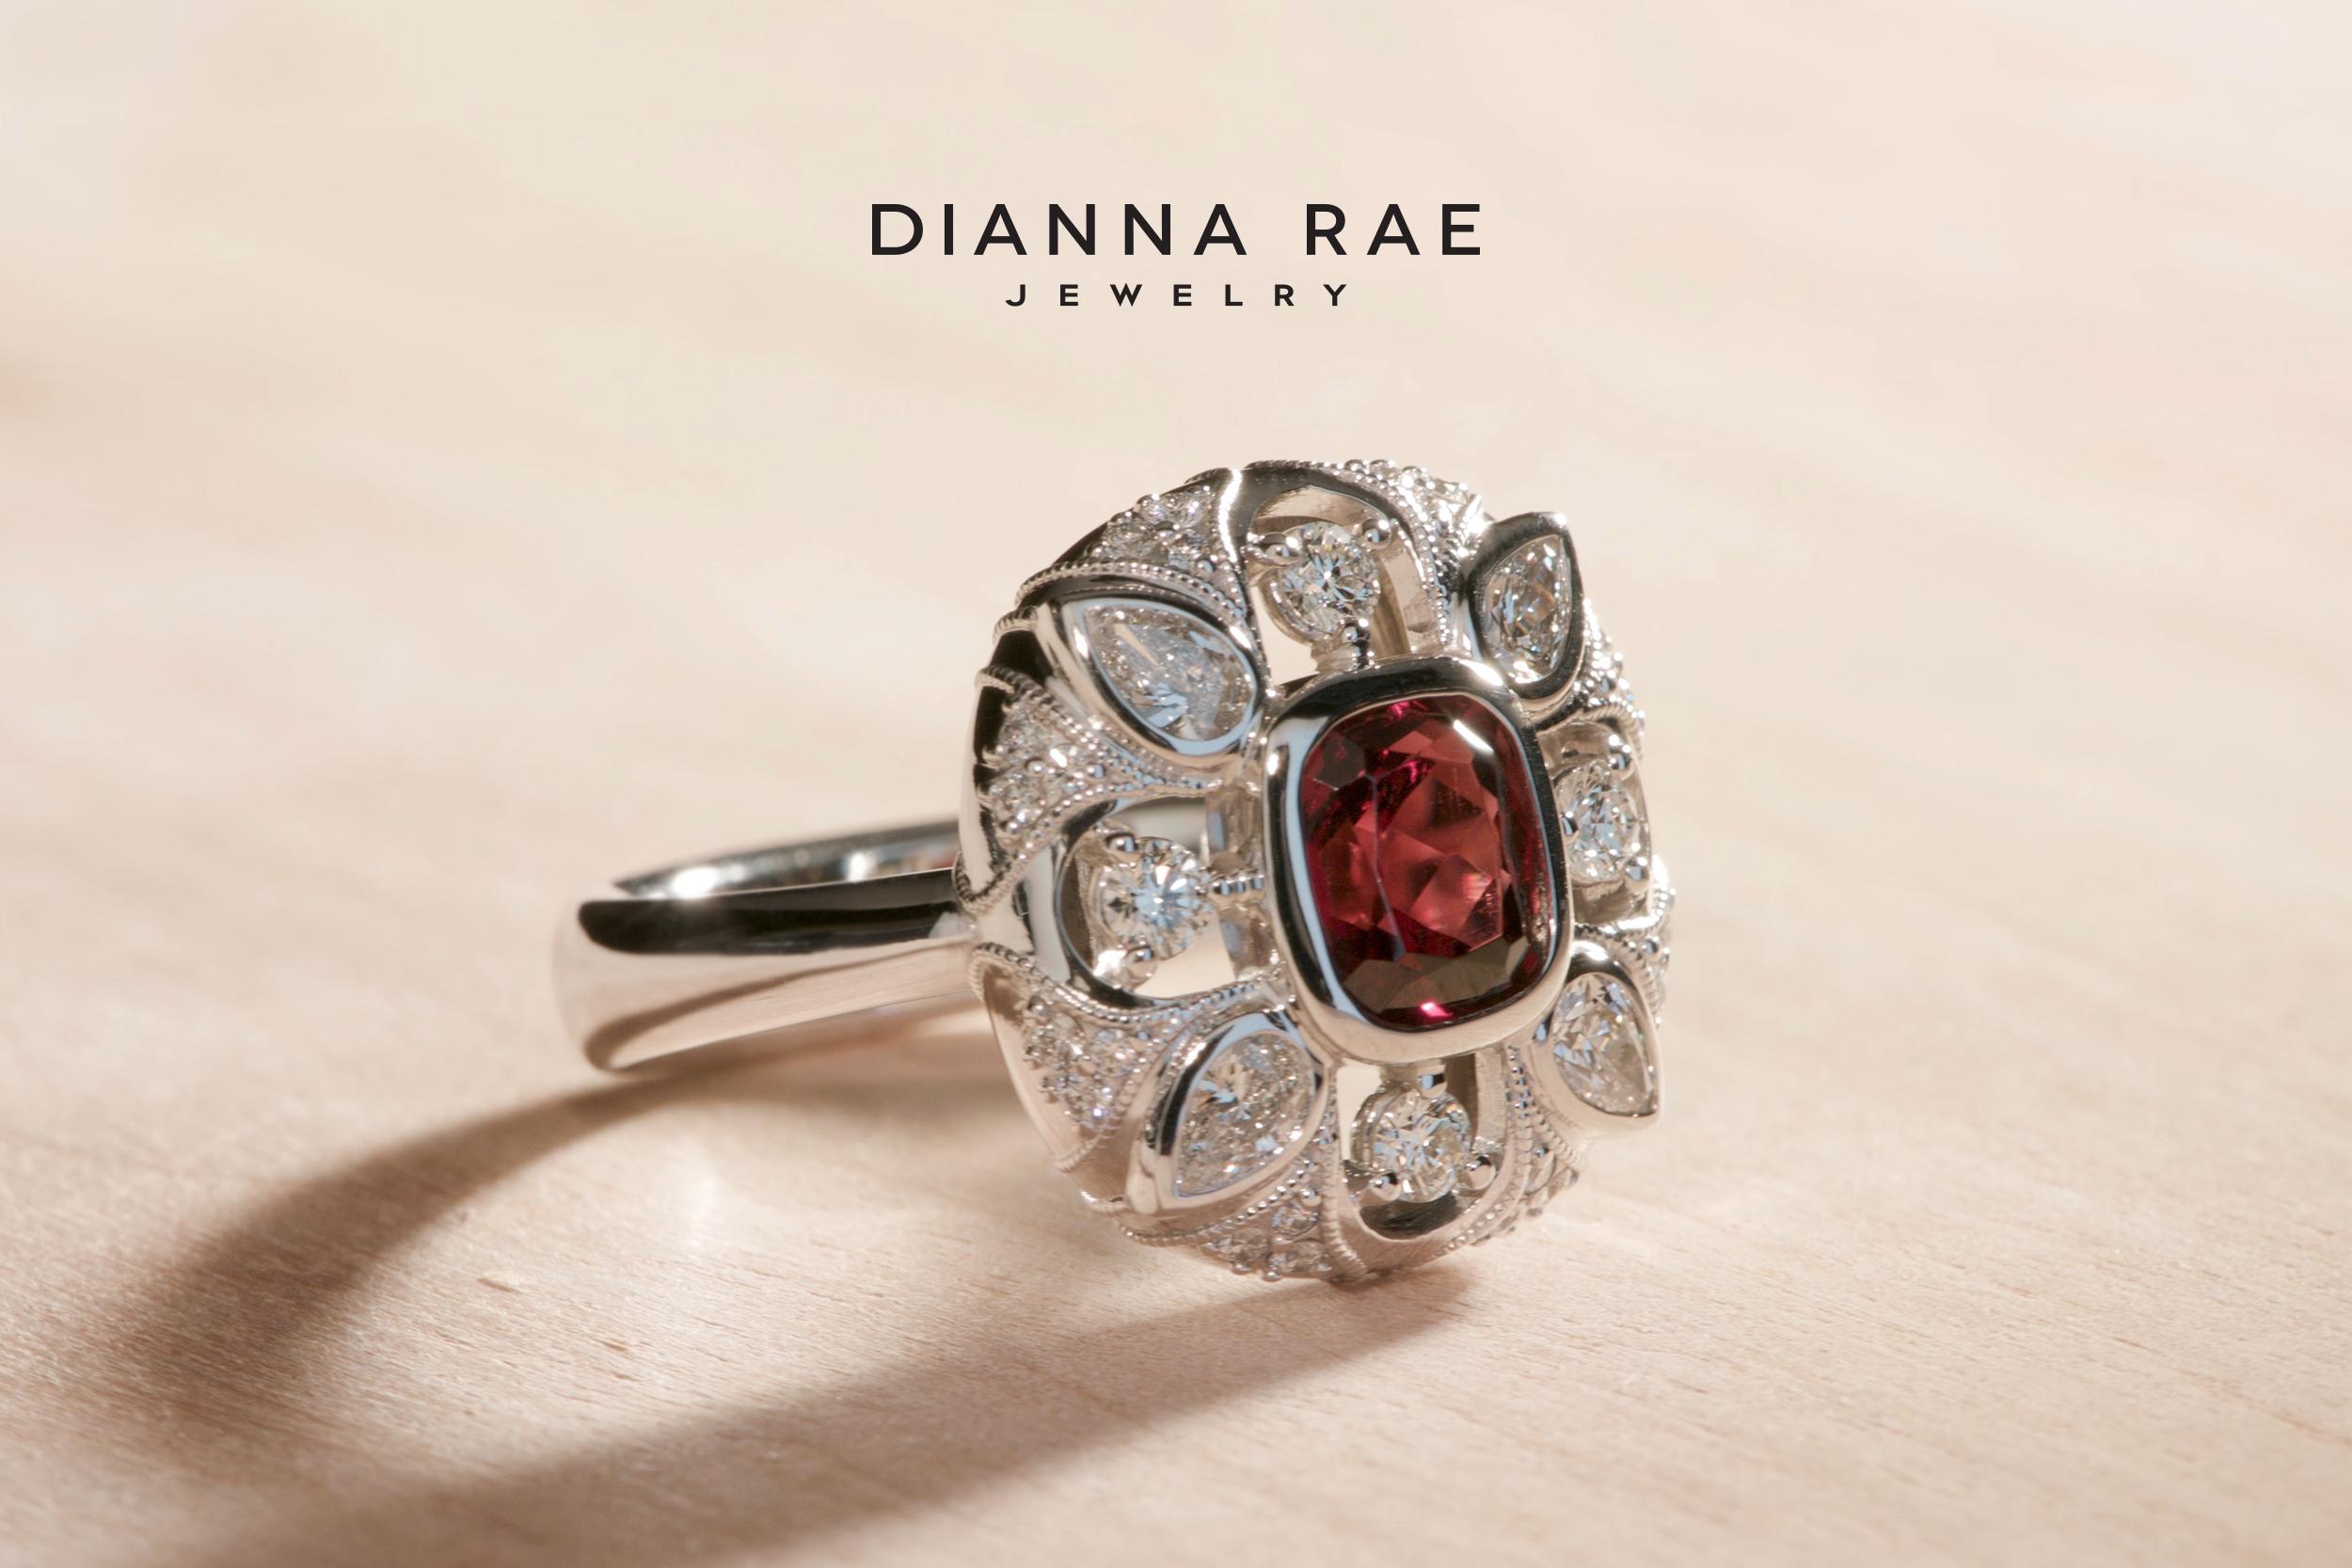 Cushion Cut White Gold 1.51 Carat Cushion Red Spinel Cocktail Ring with Diamond Accents For Sale